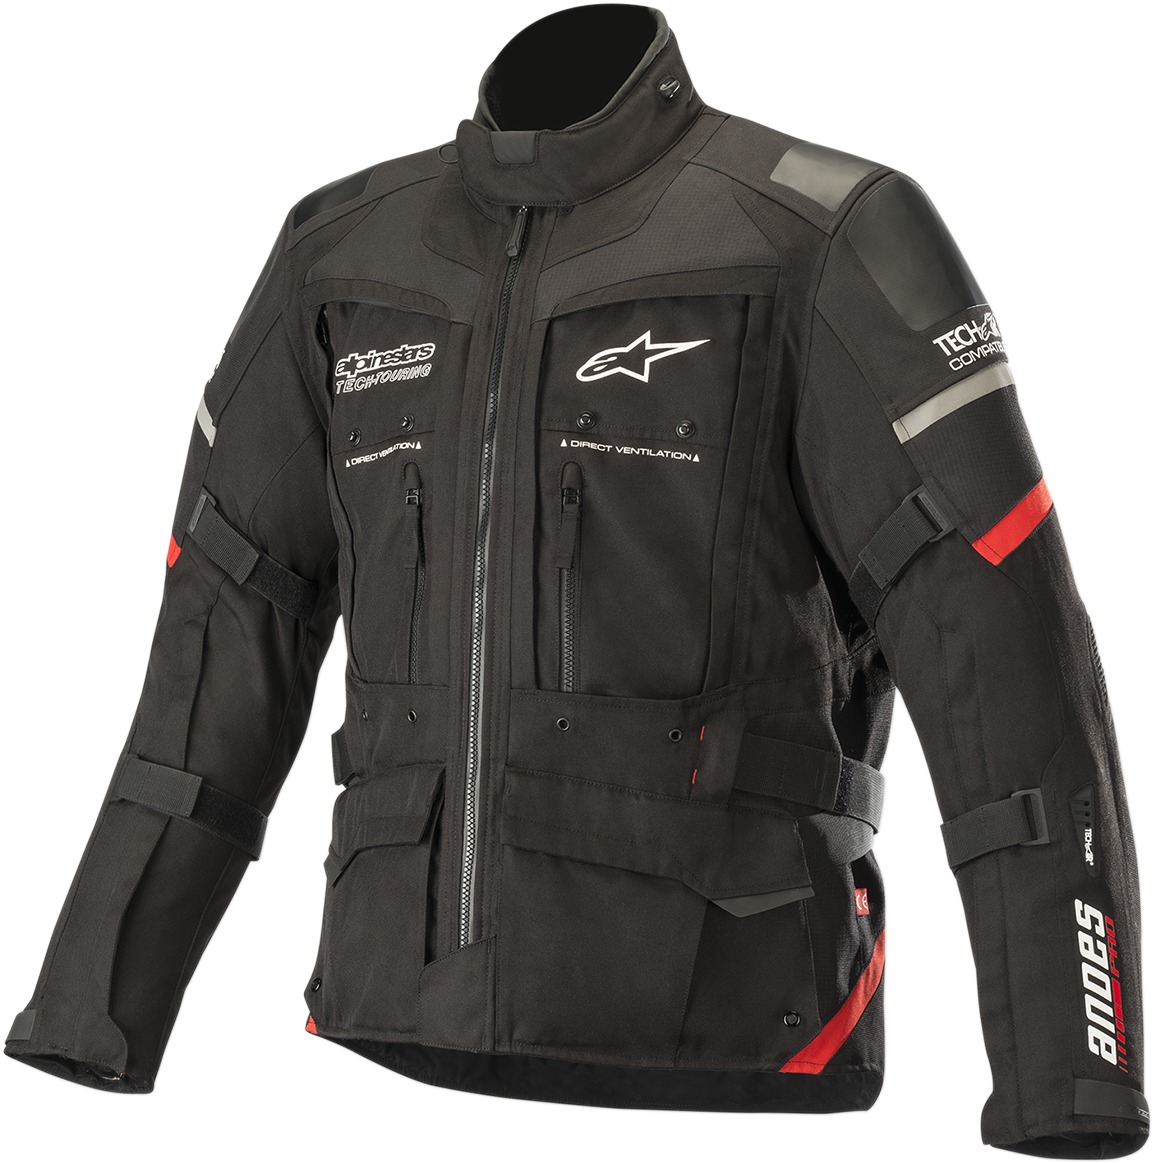 Andes Pro Drystar Street Riding Jacket Black/Gray/Red US Large - Click Image to Close